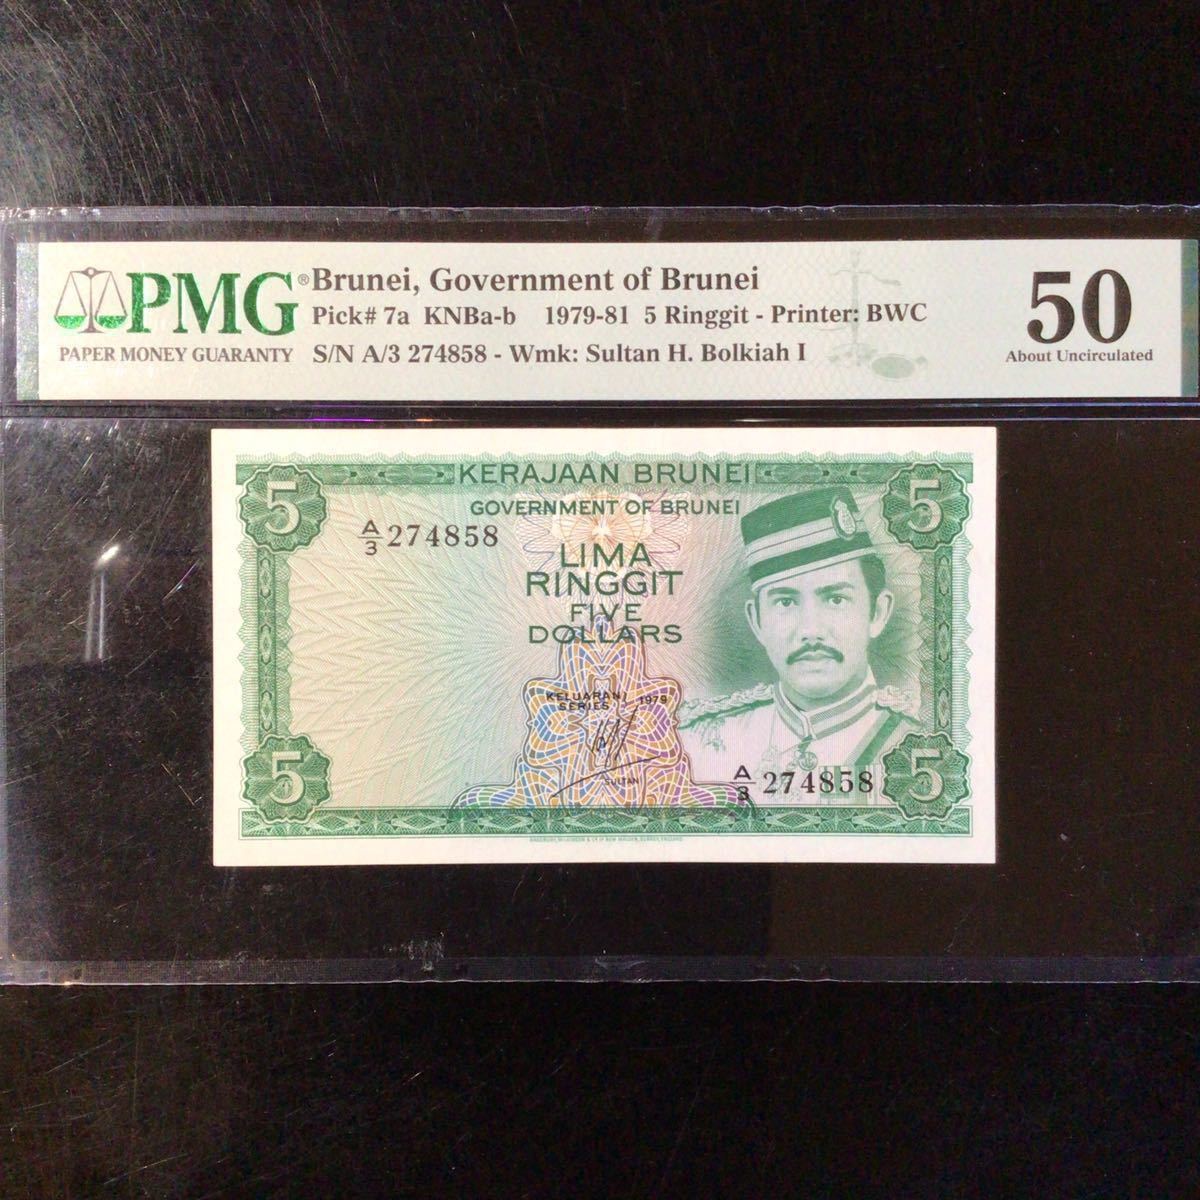 World Banknote Grading BRUNEI《 Government of Brunei》5 Ringgit【1979】『PMG Grading About Uncirculated 50』のサムネイル